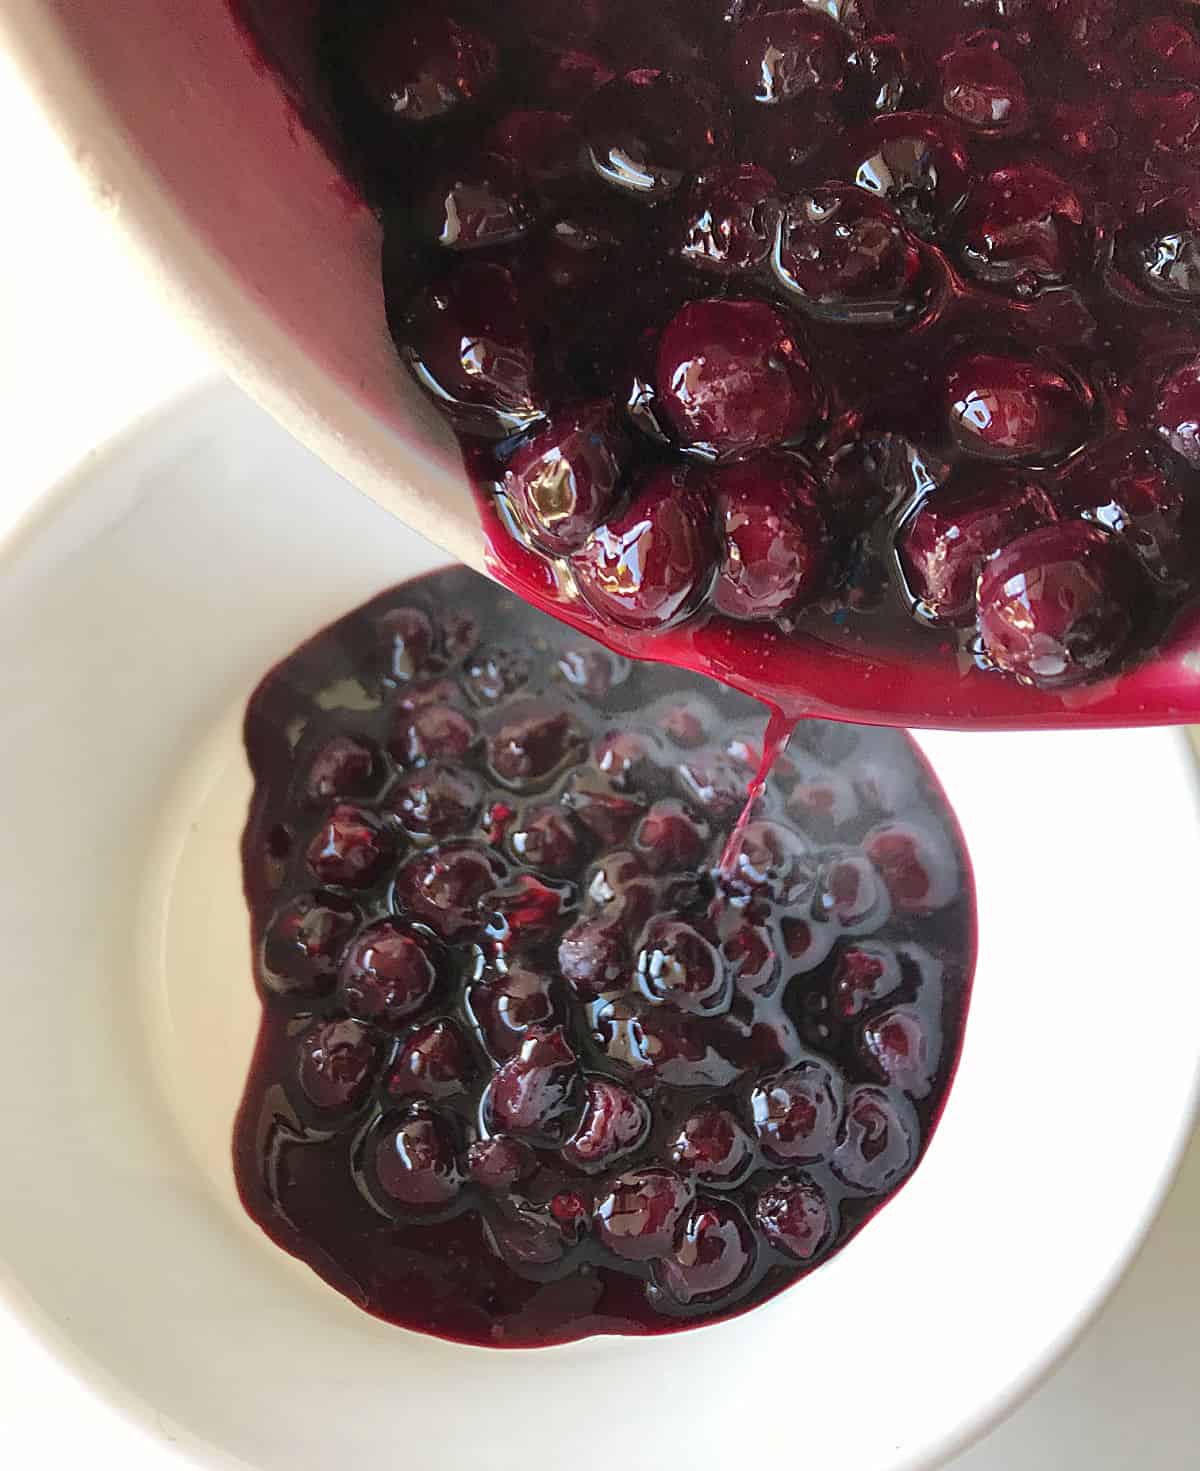 Transferring blueberry sauce from saucepan to white bowl